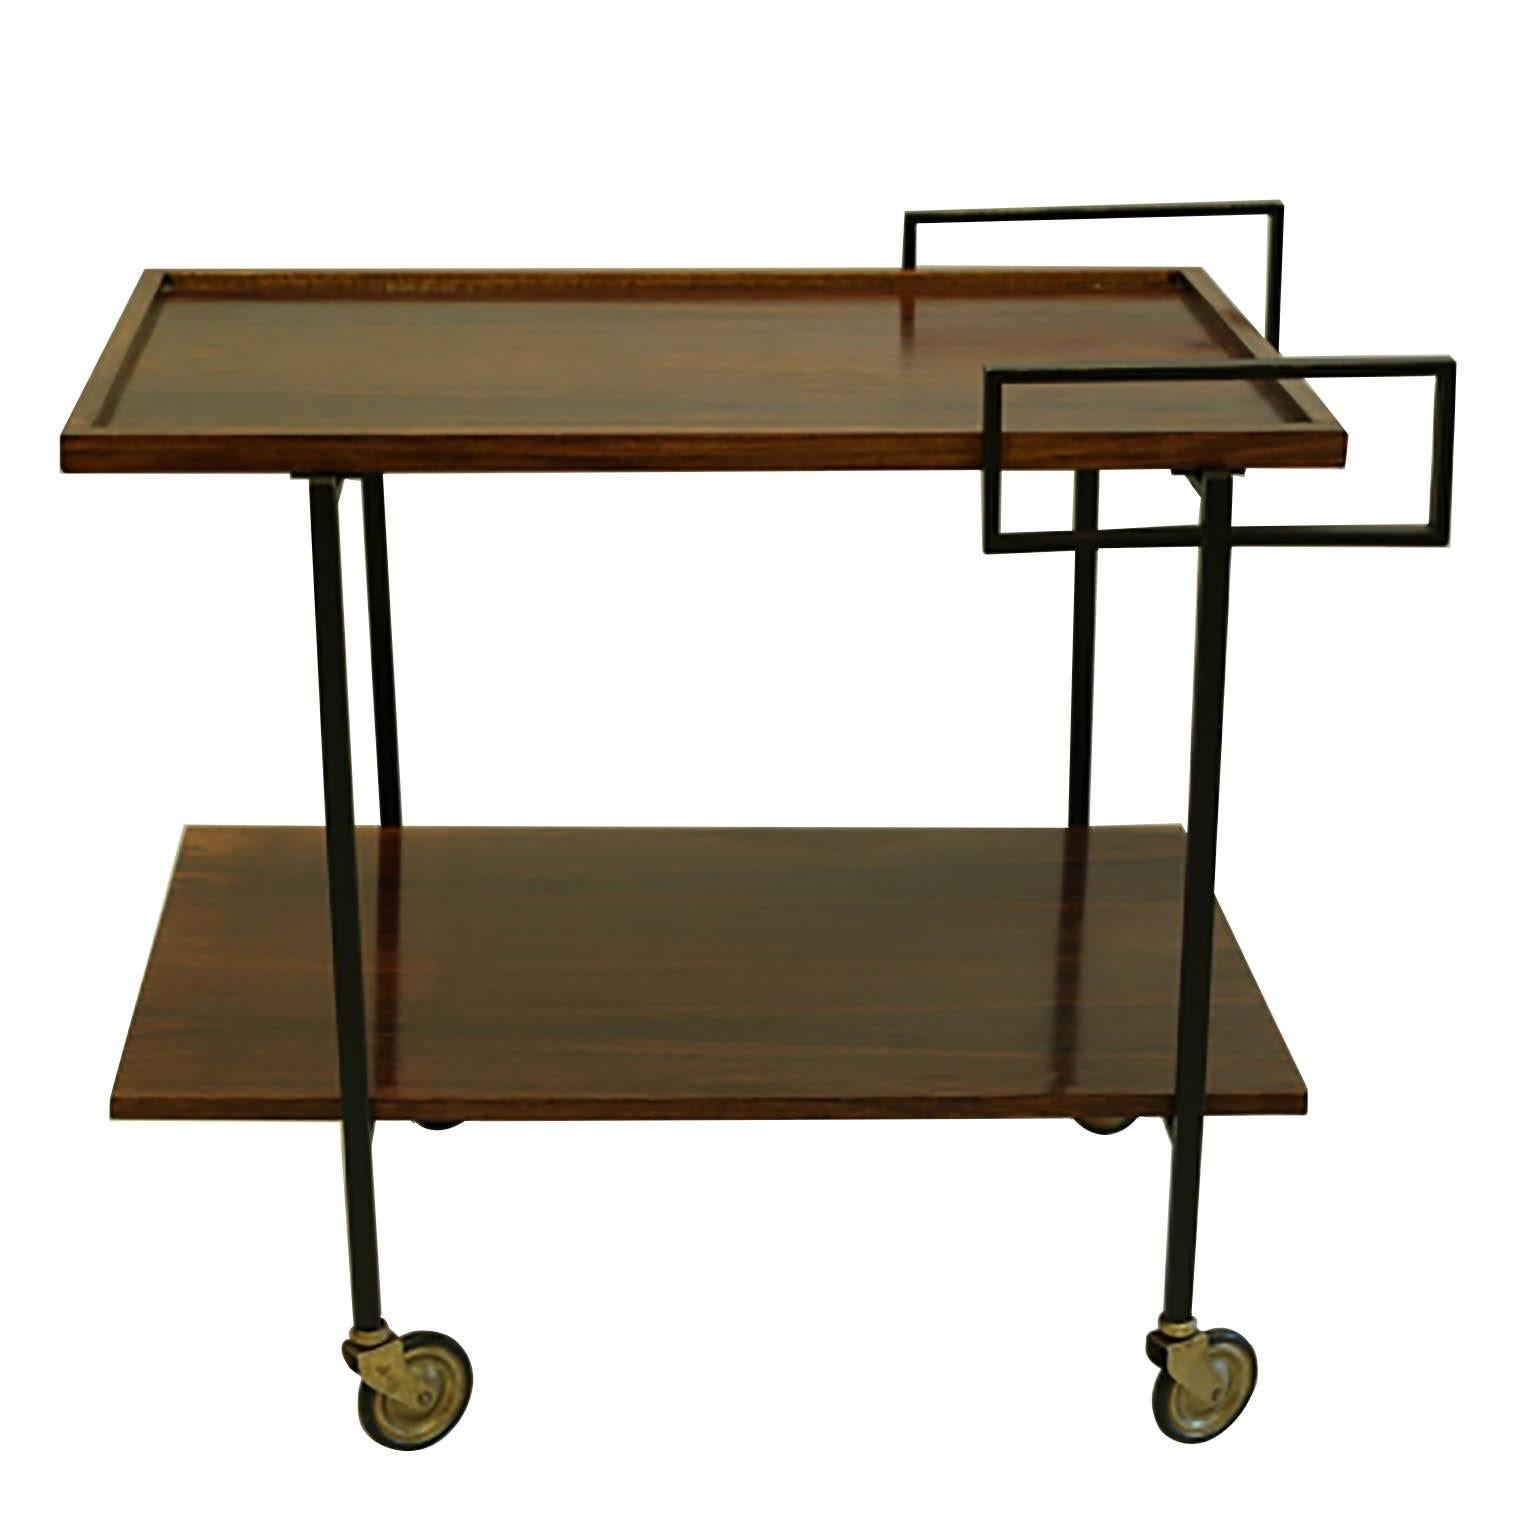 ABOUT

This is an original mid-century bar cart. The bar cart has two Rosewood shelves supported by ebonized, brass legs and handles with brass and rubber wheels. The piece has retained its original finish and has the appropriate patina consistent